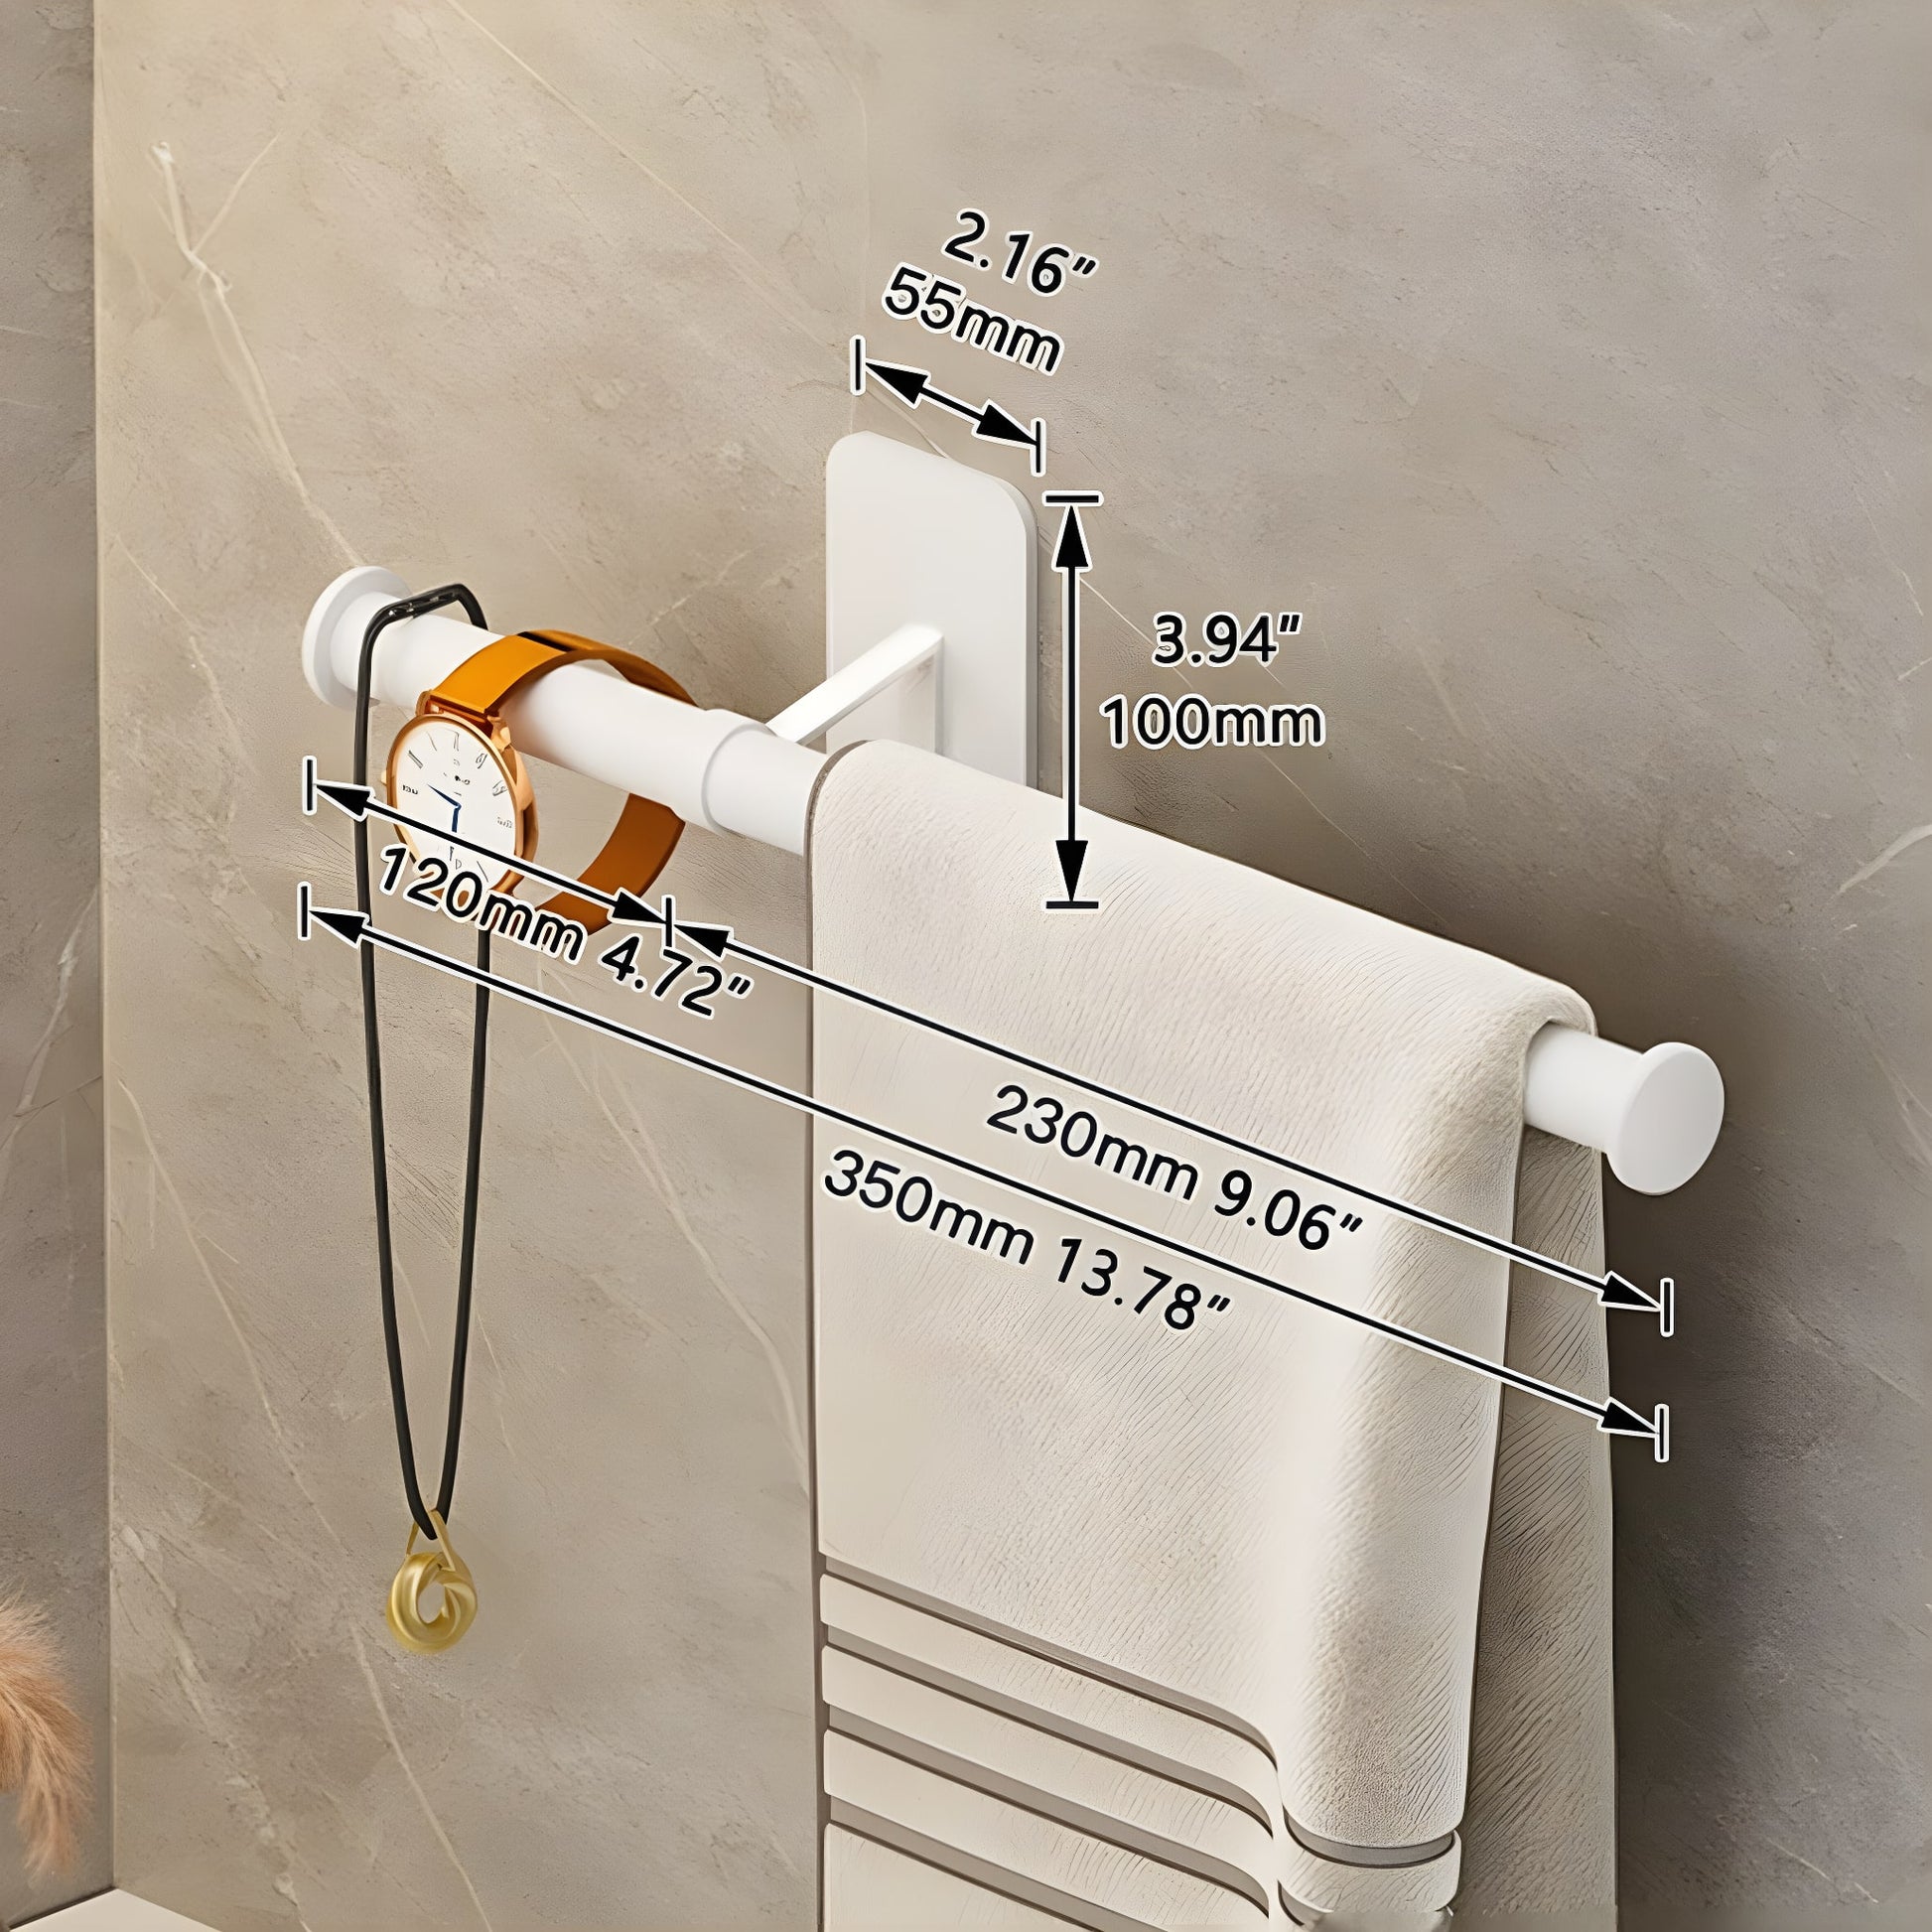 Wall-mounted pool towel rack for convenience